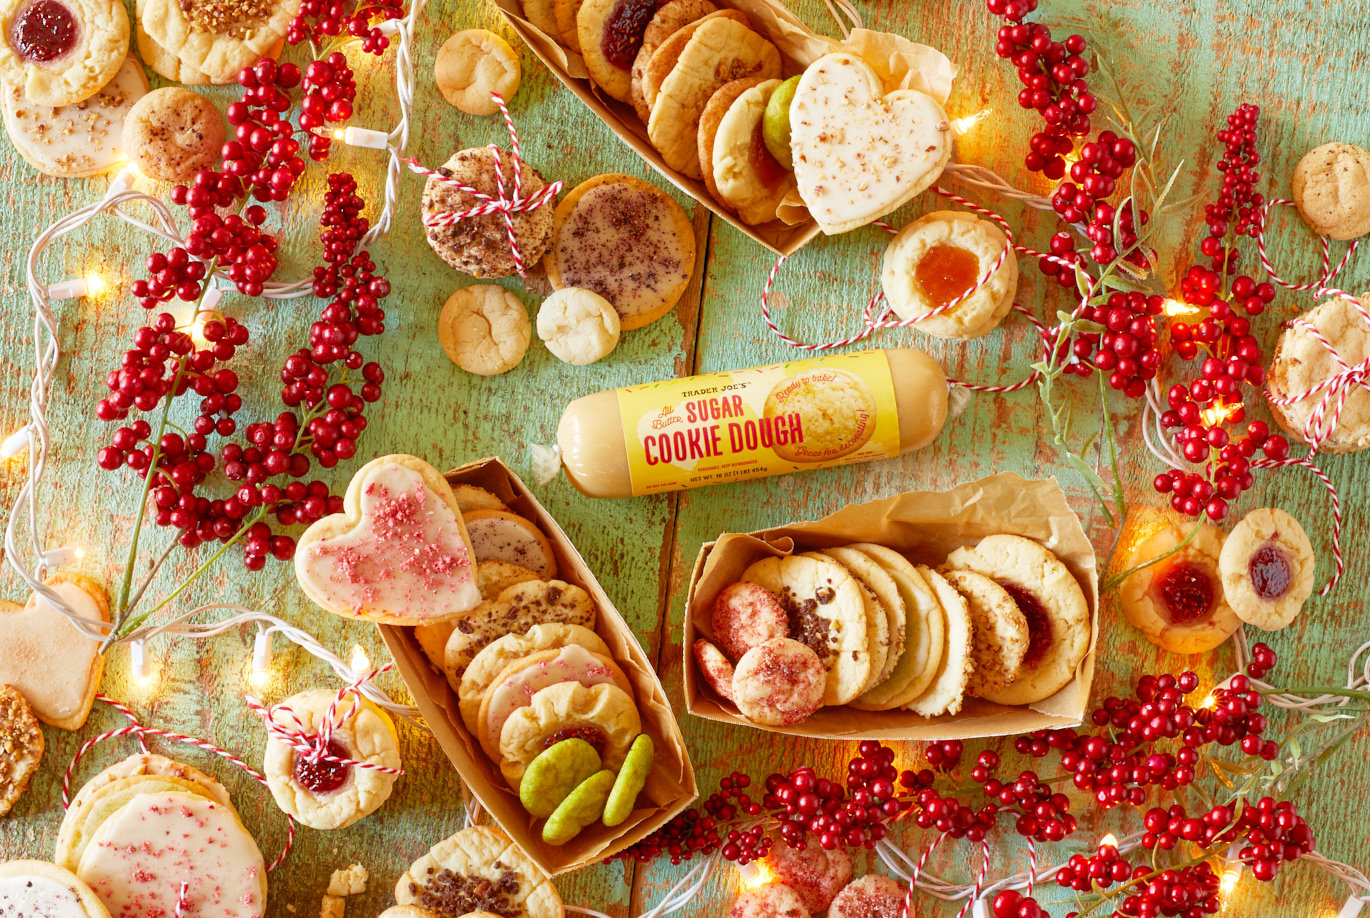 Trader Joe's All Butter Sugar Cookie Dough; prepared as several different kinds of cookies, surrounded by festive berries, string light and ribbon